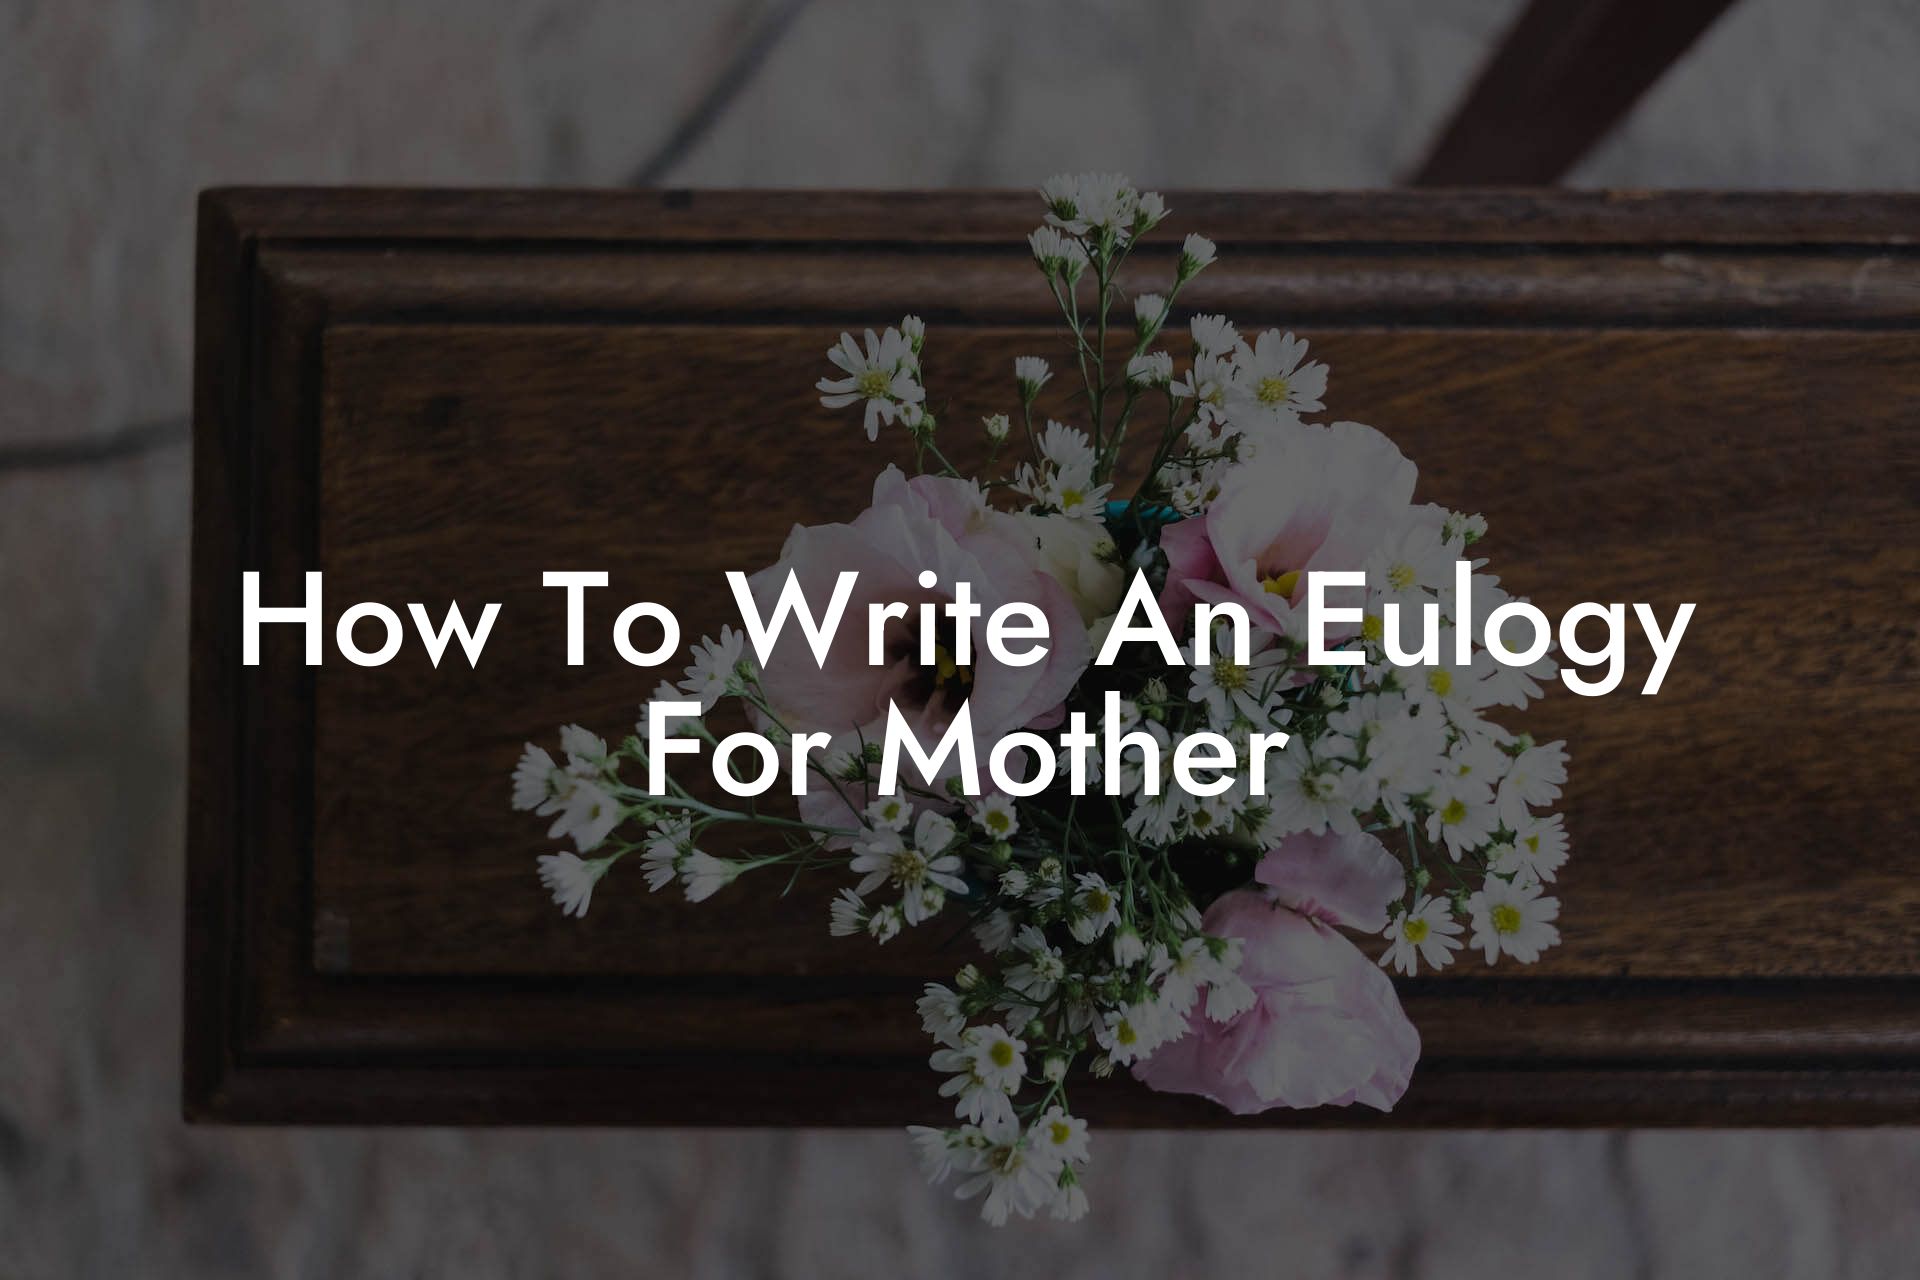 How To Write An Eulogy For Mother